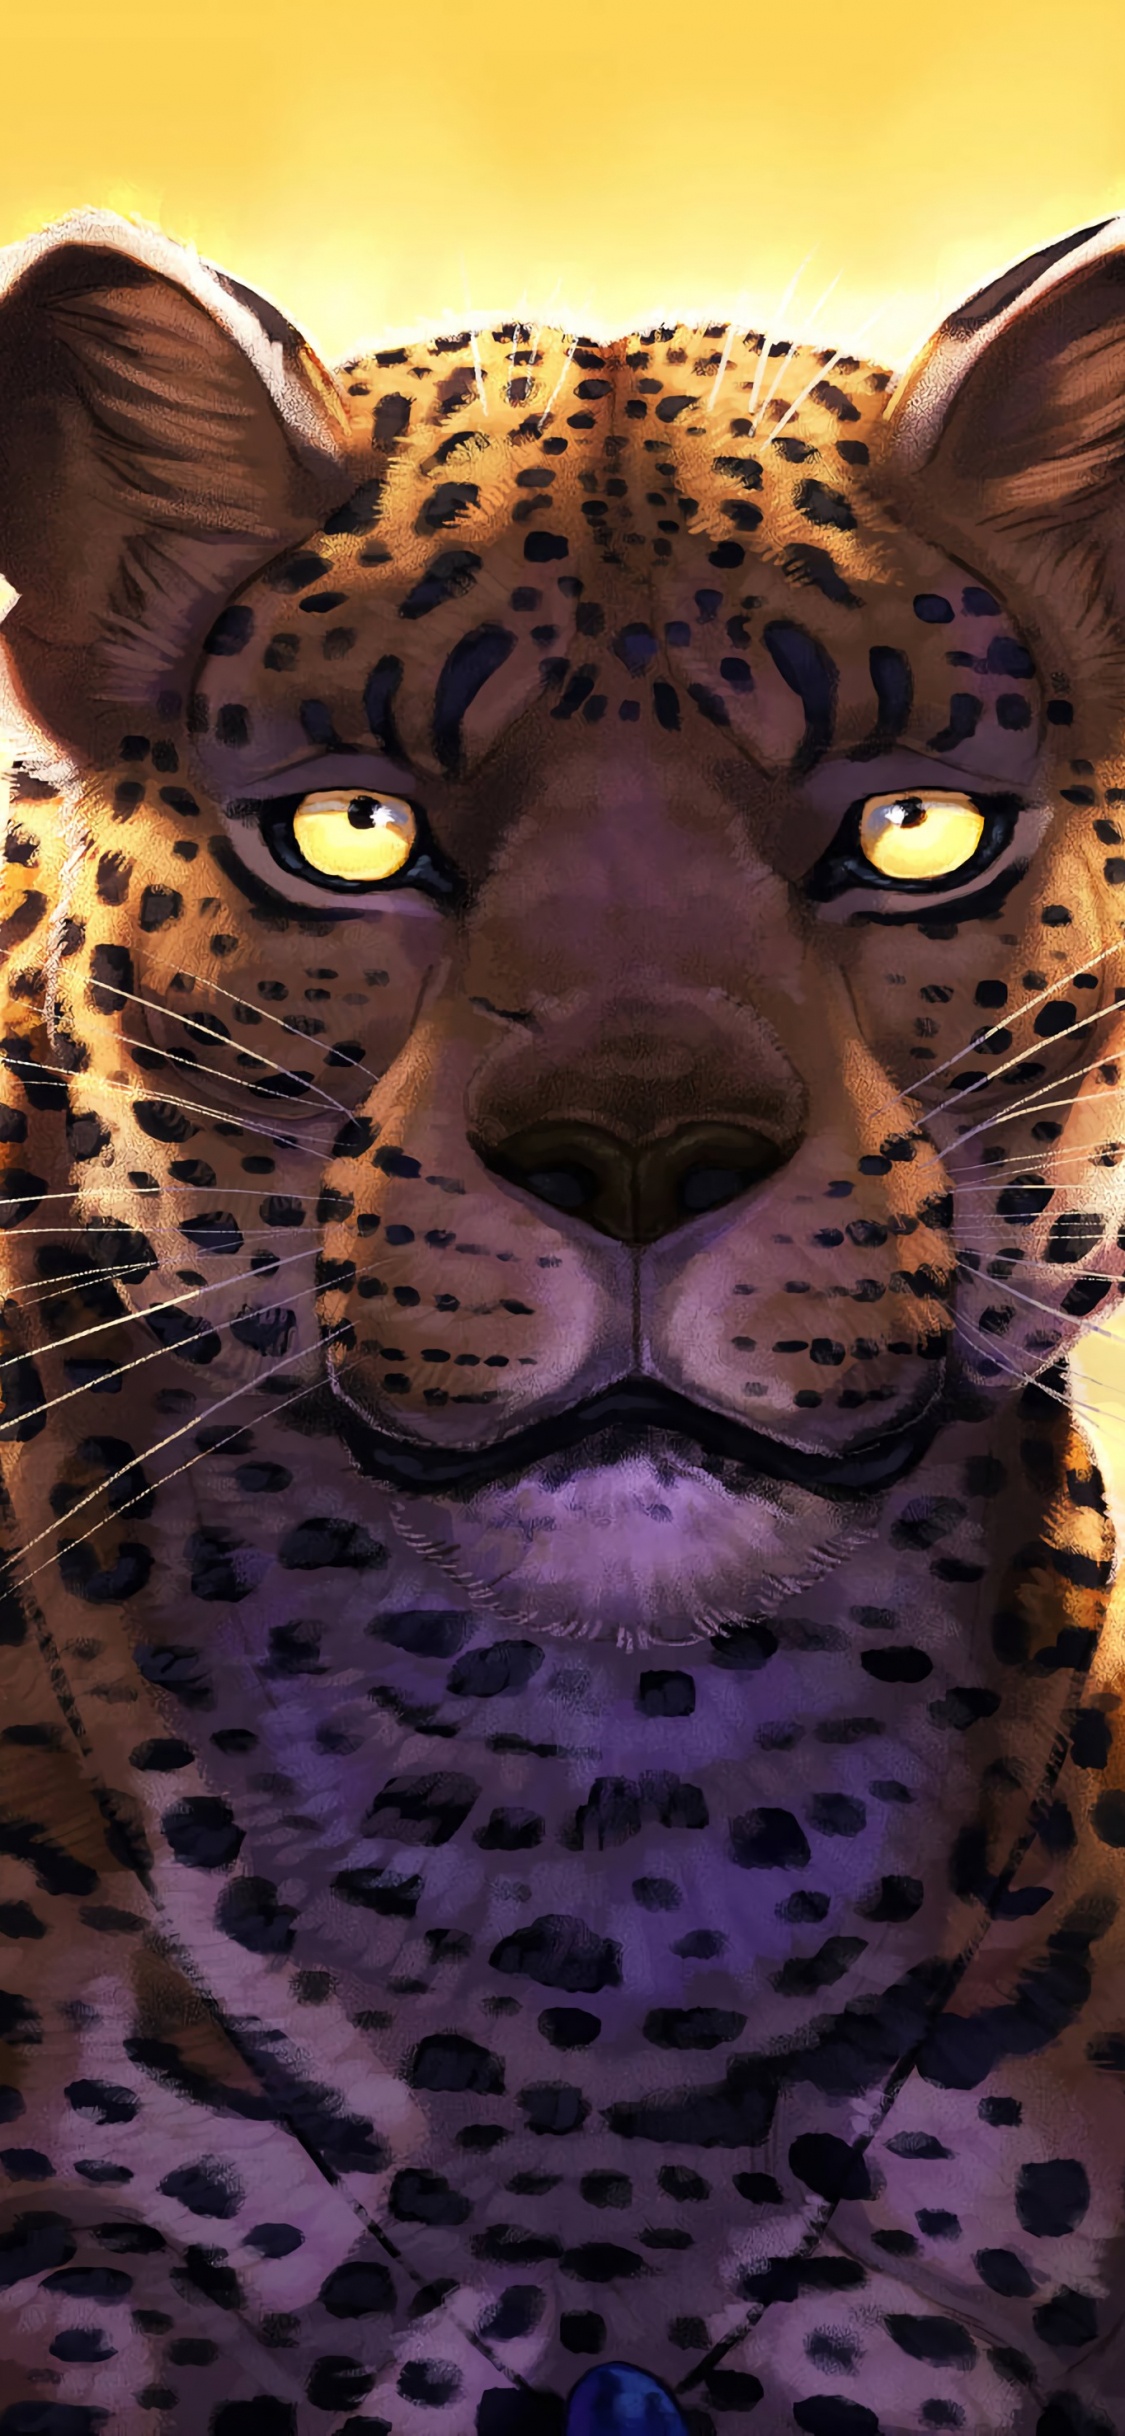 Brown and Black Leopard Illustration. Wallpaper in 1125x2436 Resolution